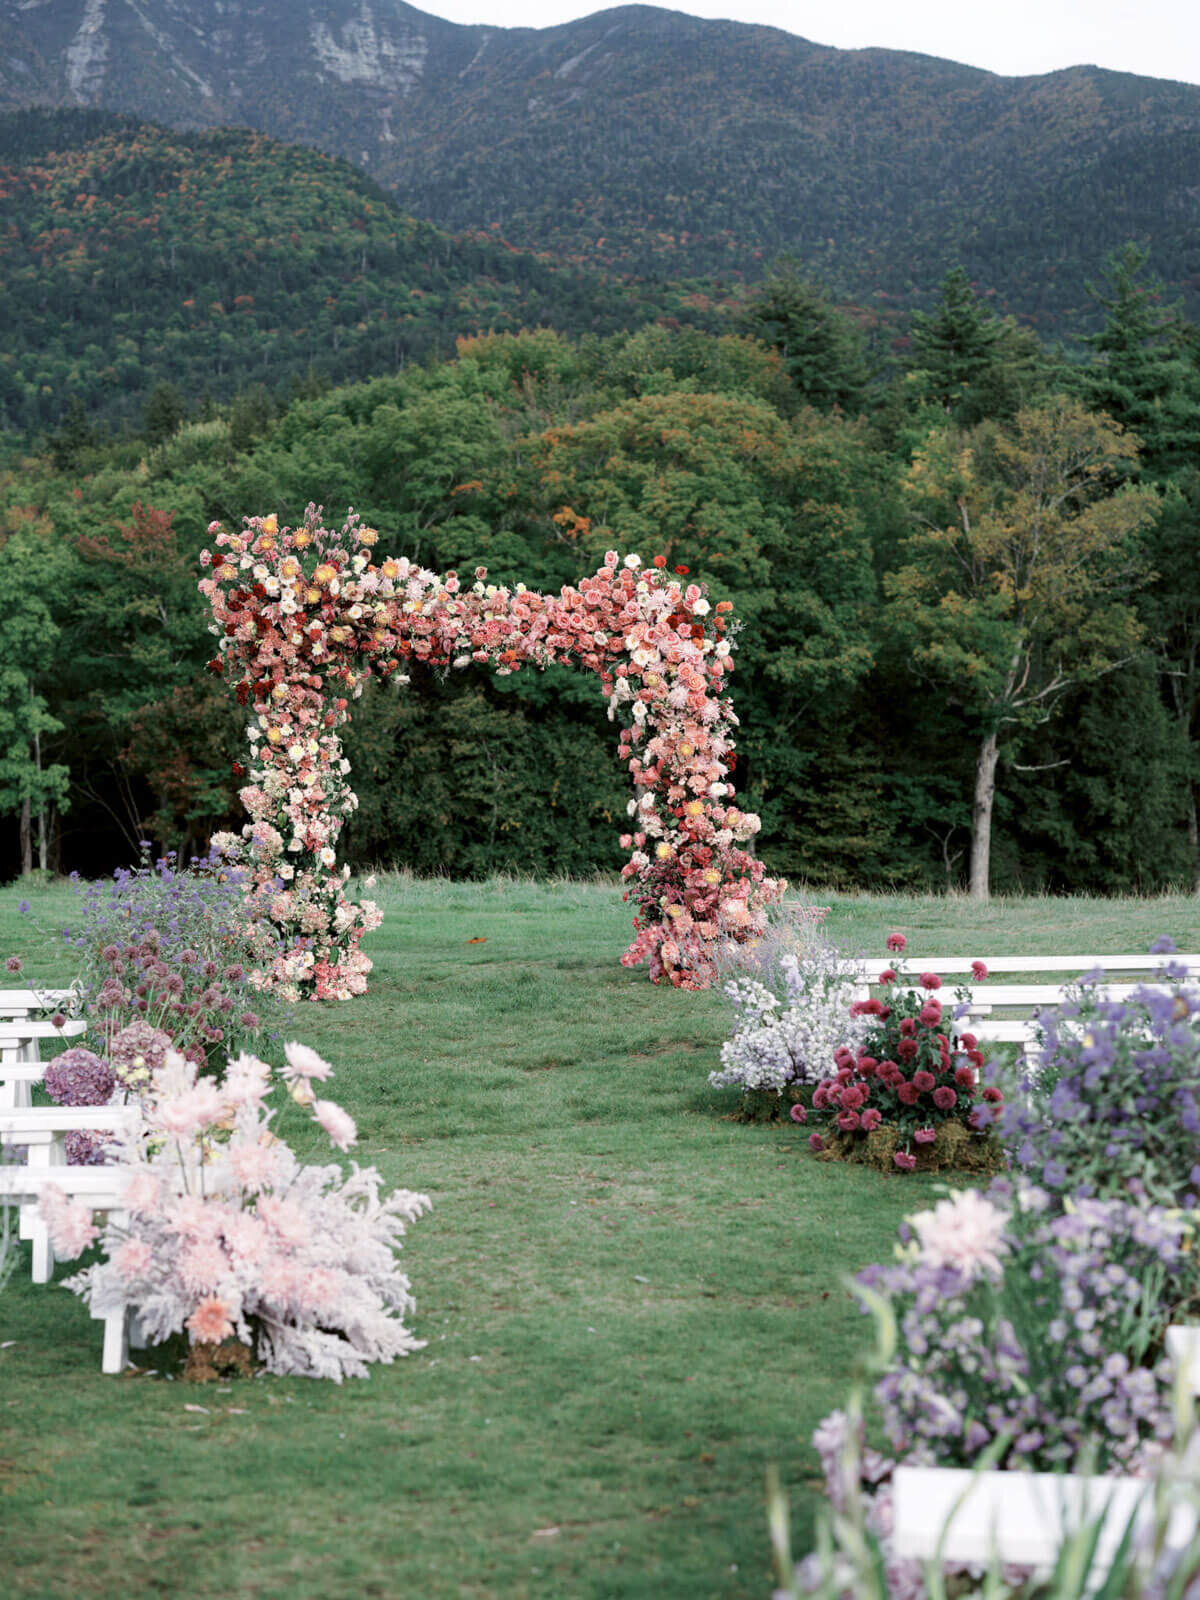 A beautiful wedding arch full of flowers, trees and mountains is in the background at The Ausable Club,NY. Image by Jenny Fu Studio.